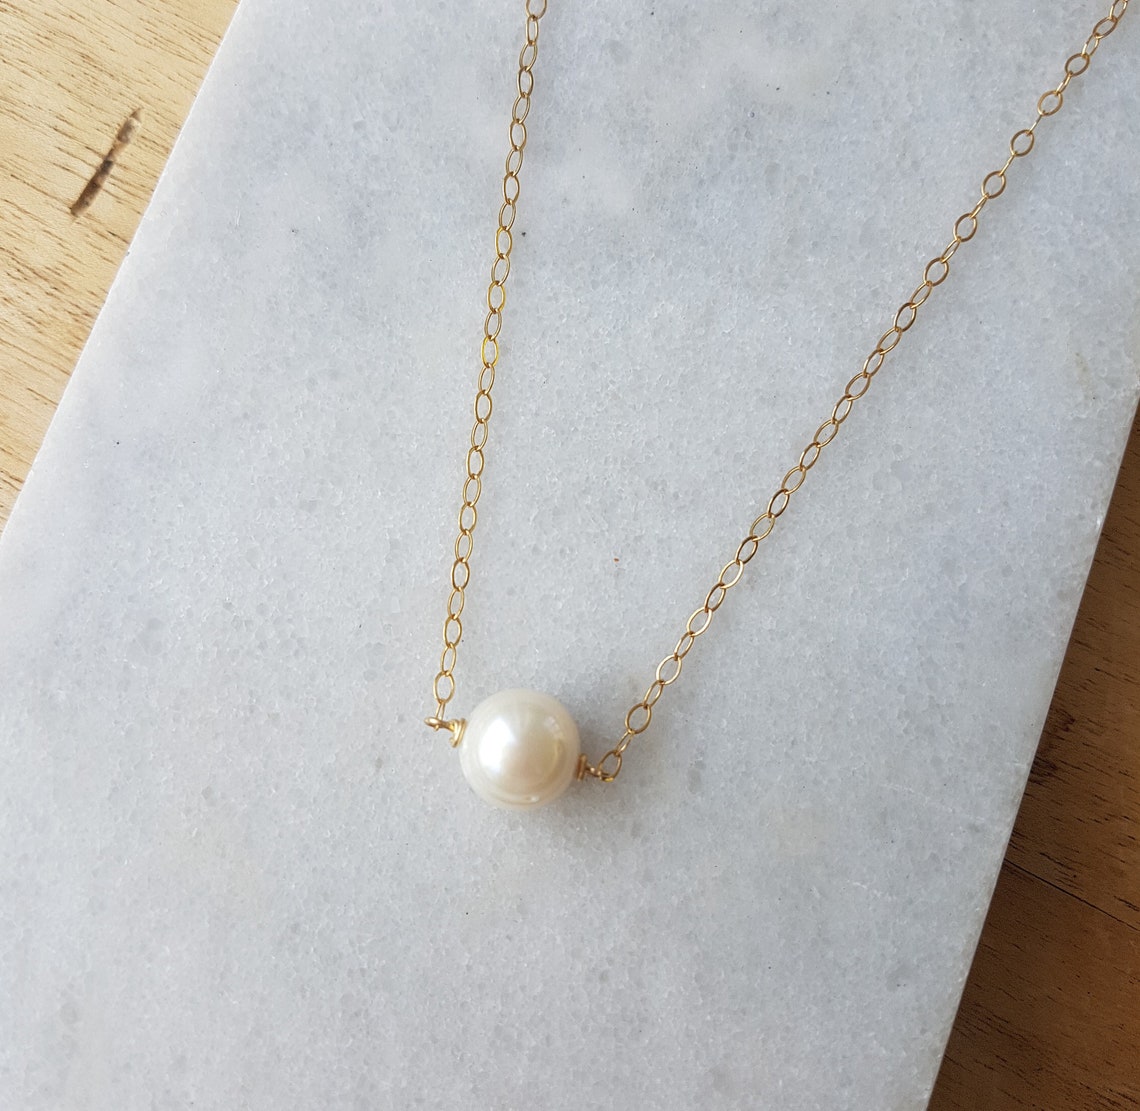 Freshwater Pearl Necklace 14K Gold Filled Single Pearl | Etsy